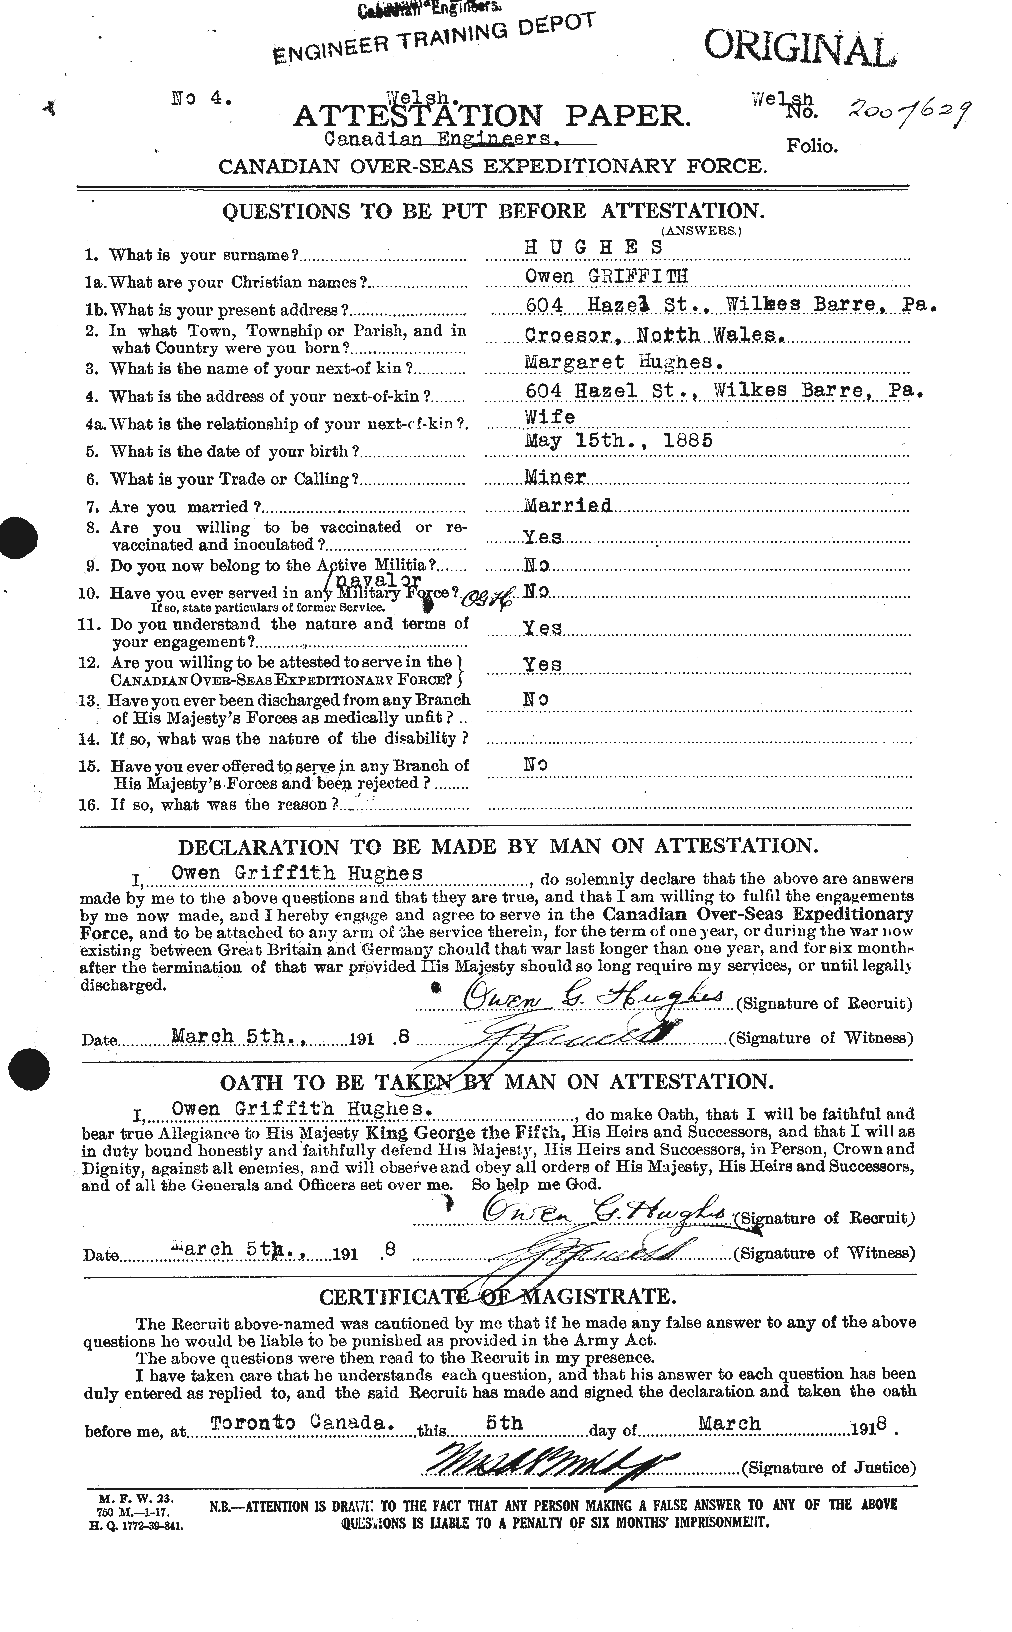 Personnel Records of the First World War - CEF 404143a